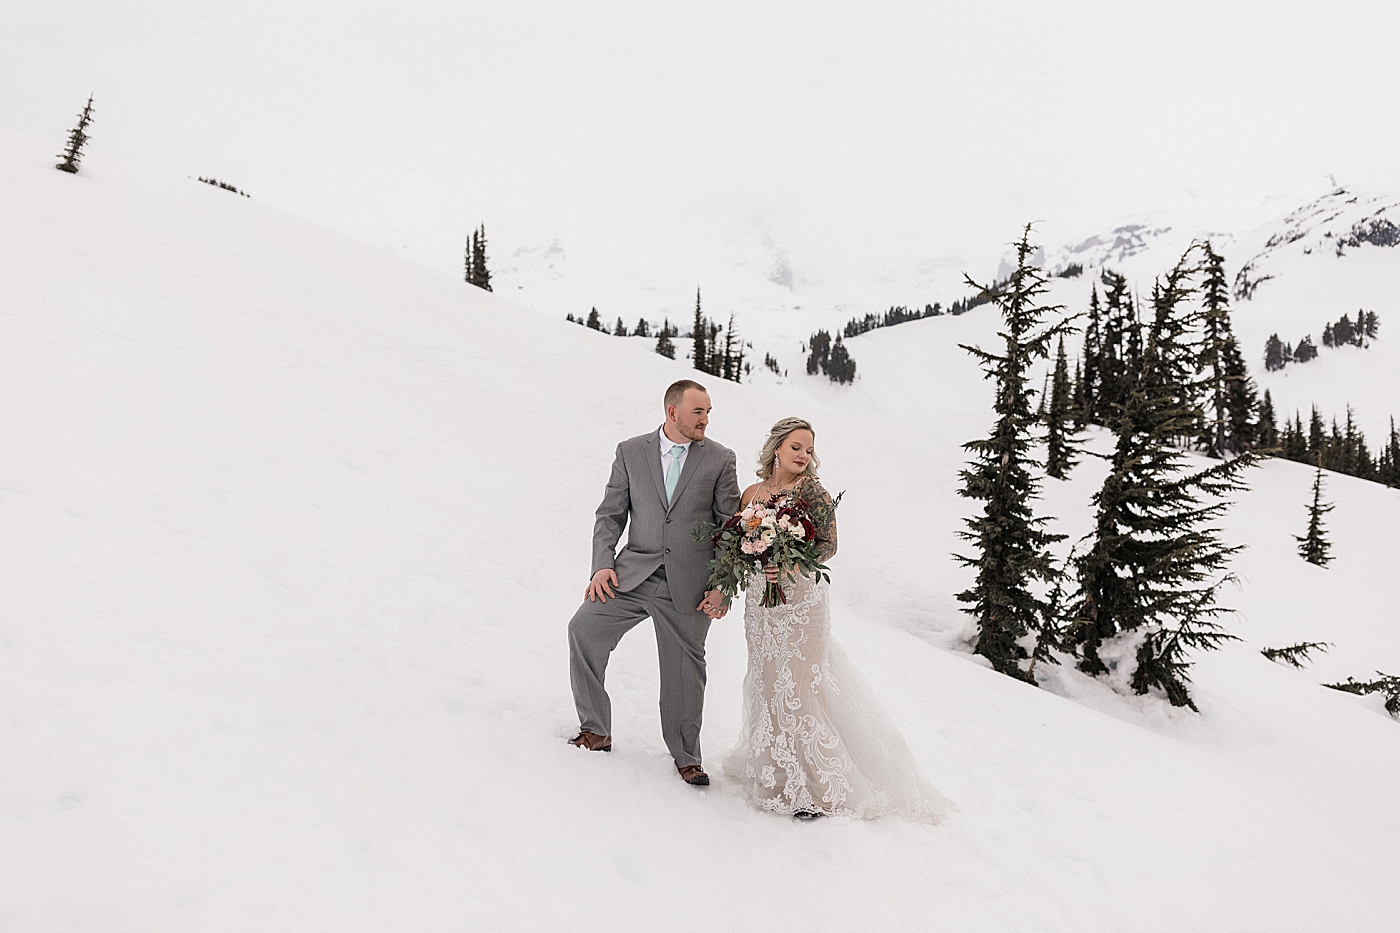 Bride and groom portraits in the snow at Mt Rainier. Photo by Megan Montalvo Photography.